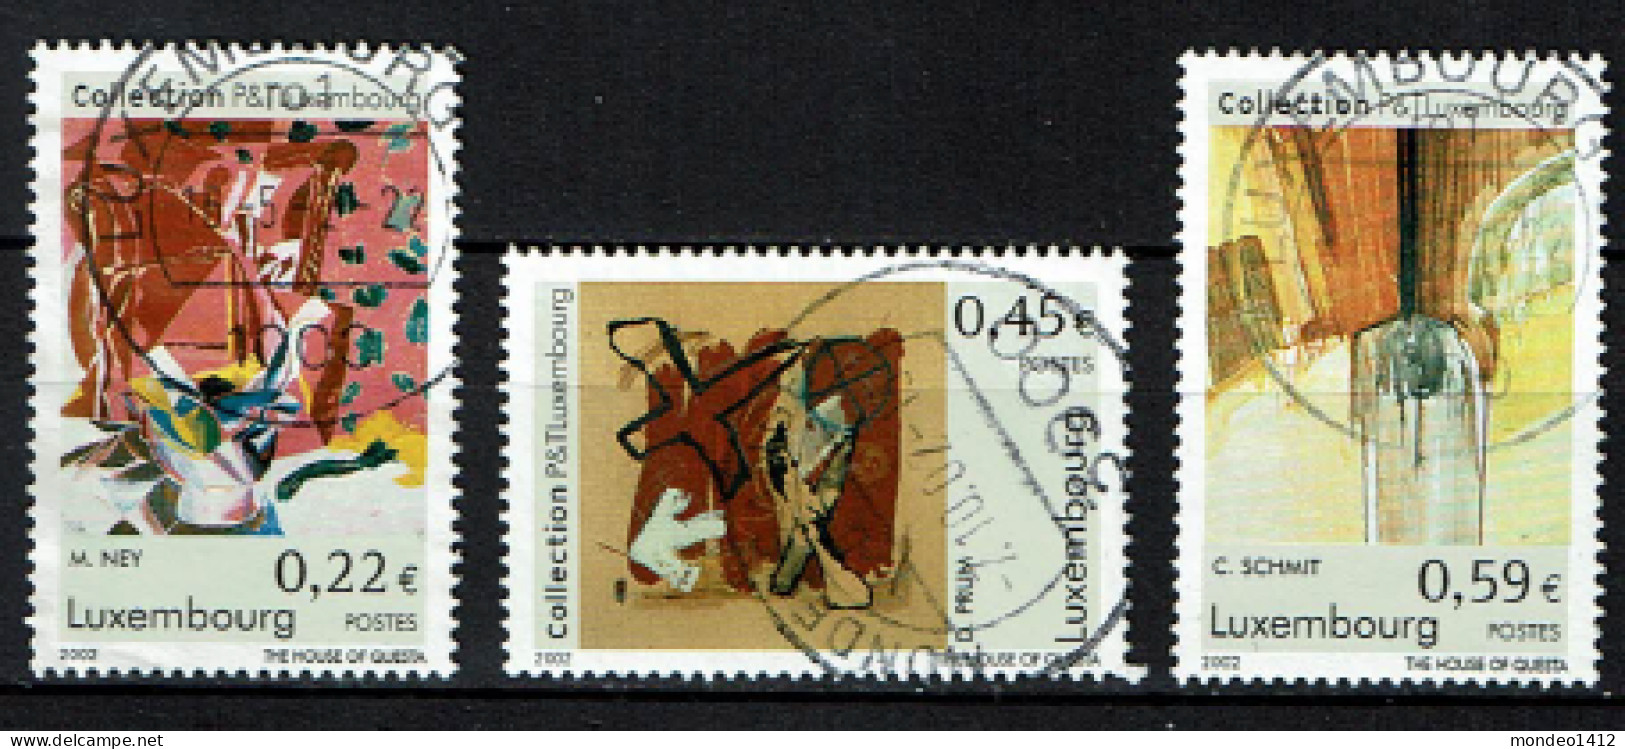 Luxembourg 2002 - YT 1517/1519 - Modern Art Collection - Moritz Ney, Dany Prüm, Christiane Schmit - Used Stamps